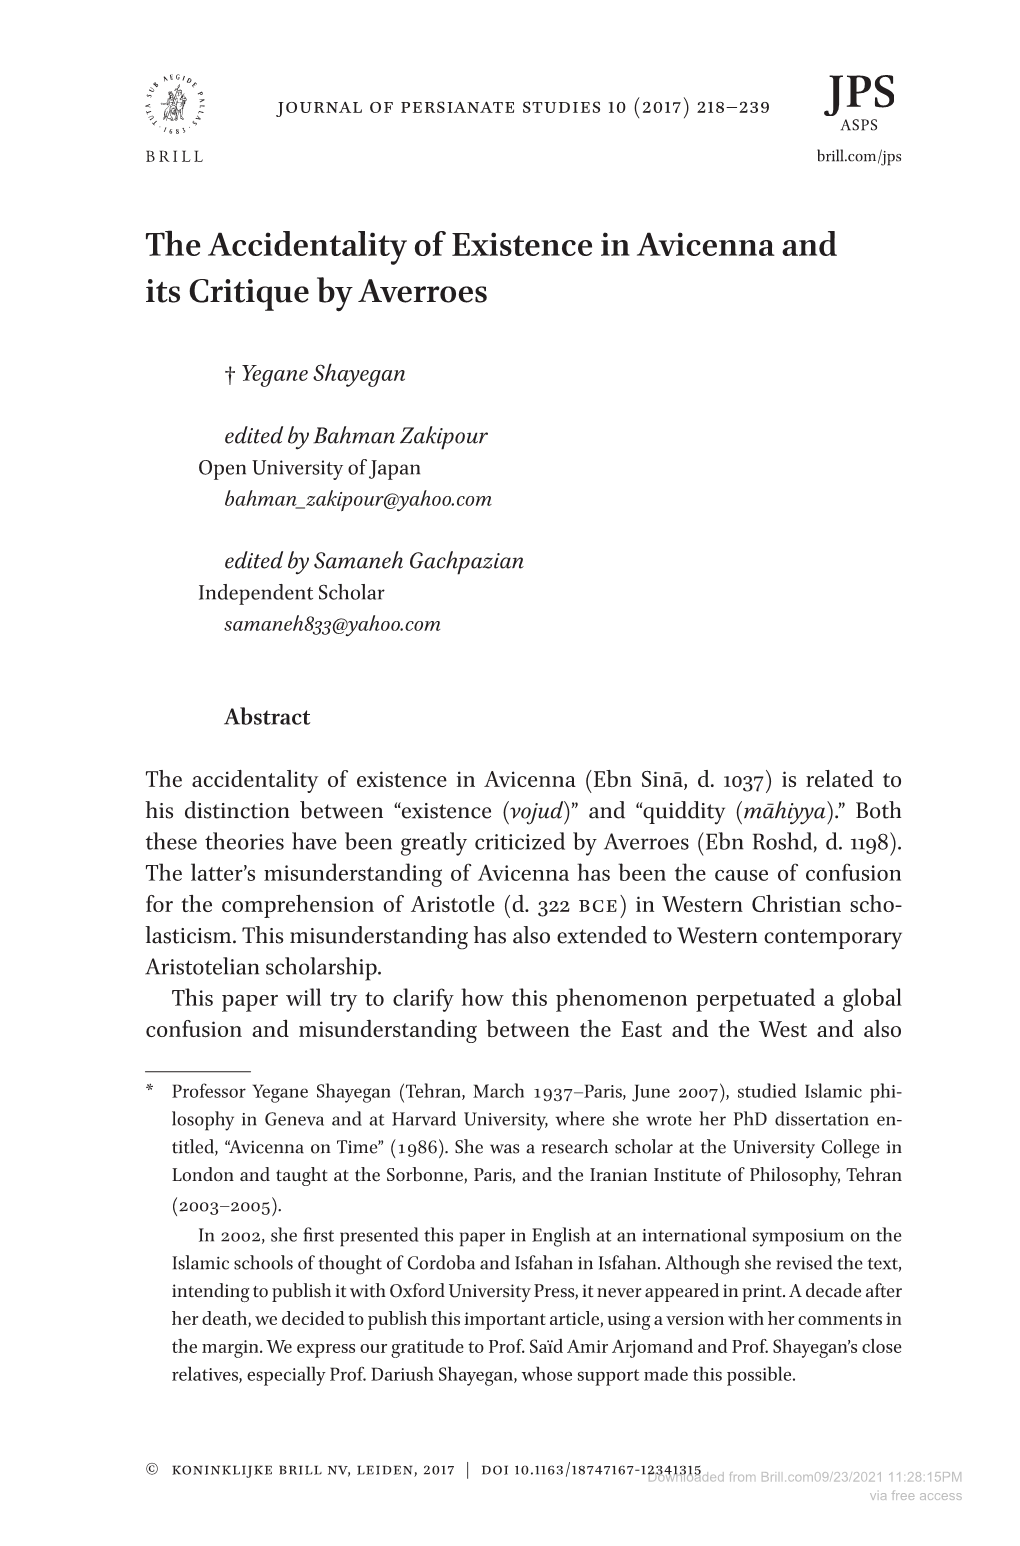 The Accidentality of Existence in Avicenna and Its Critique by Averroes